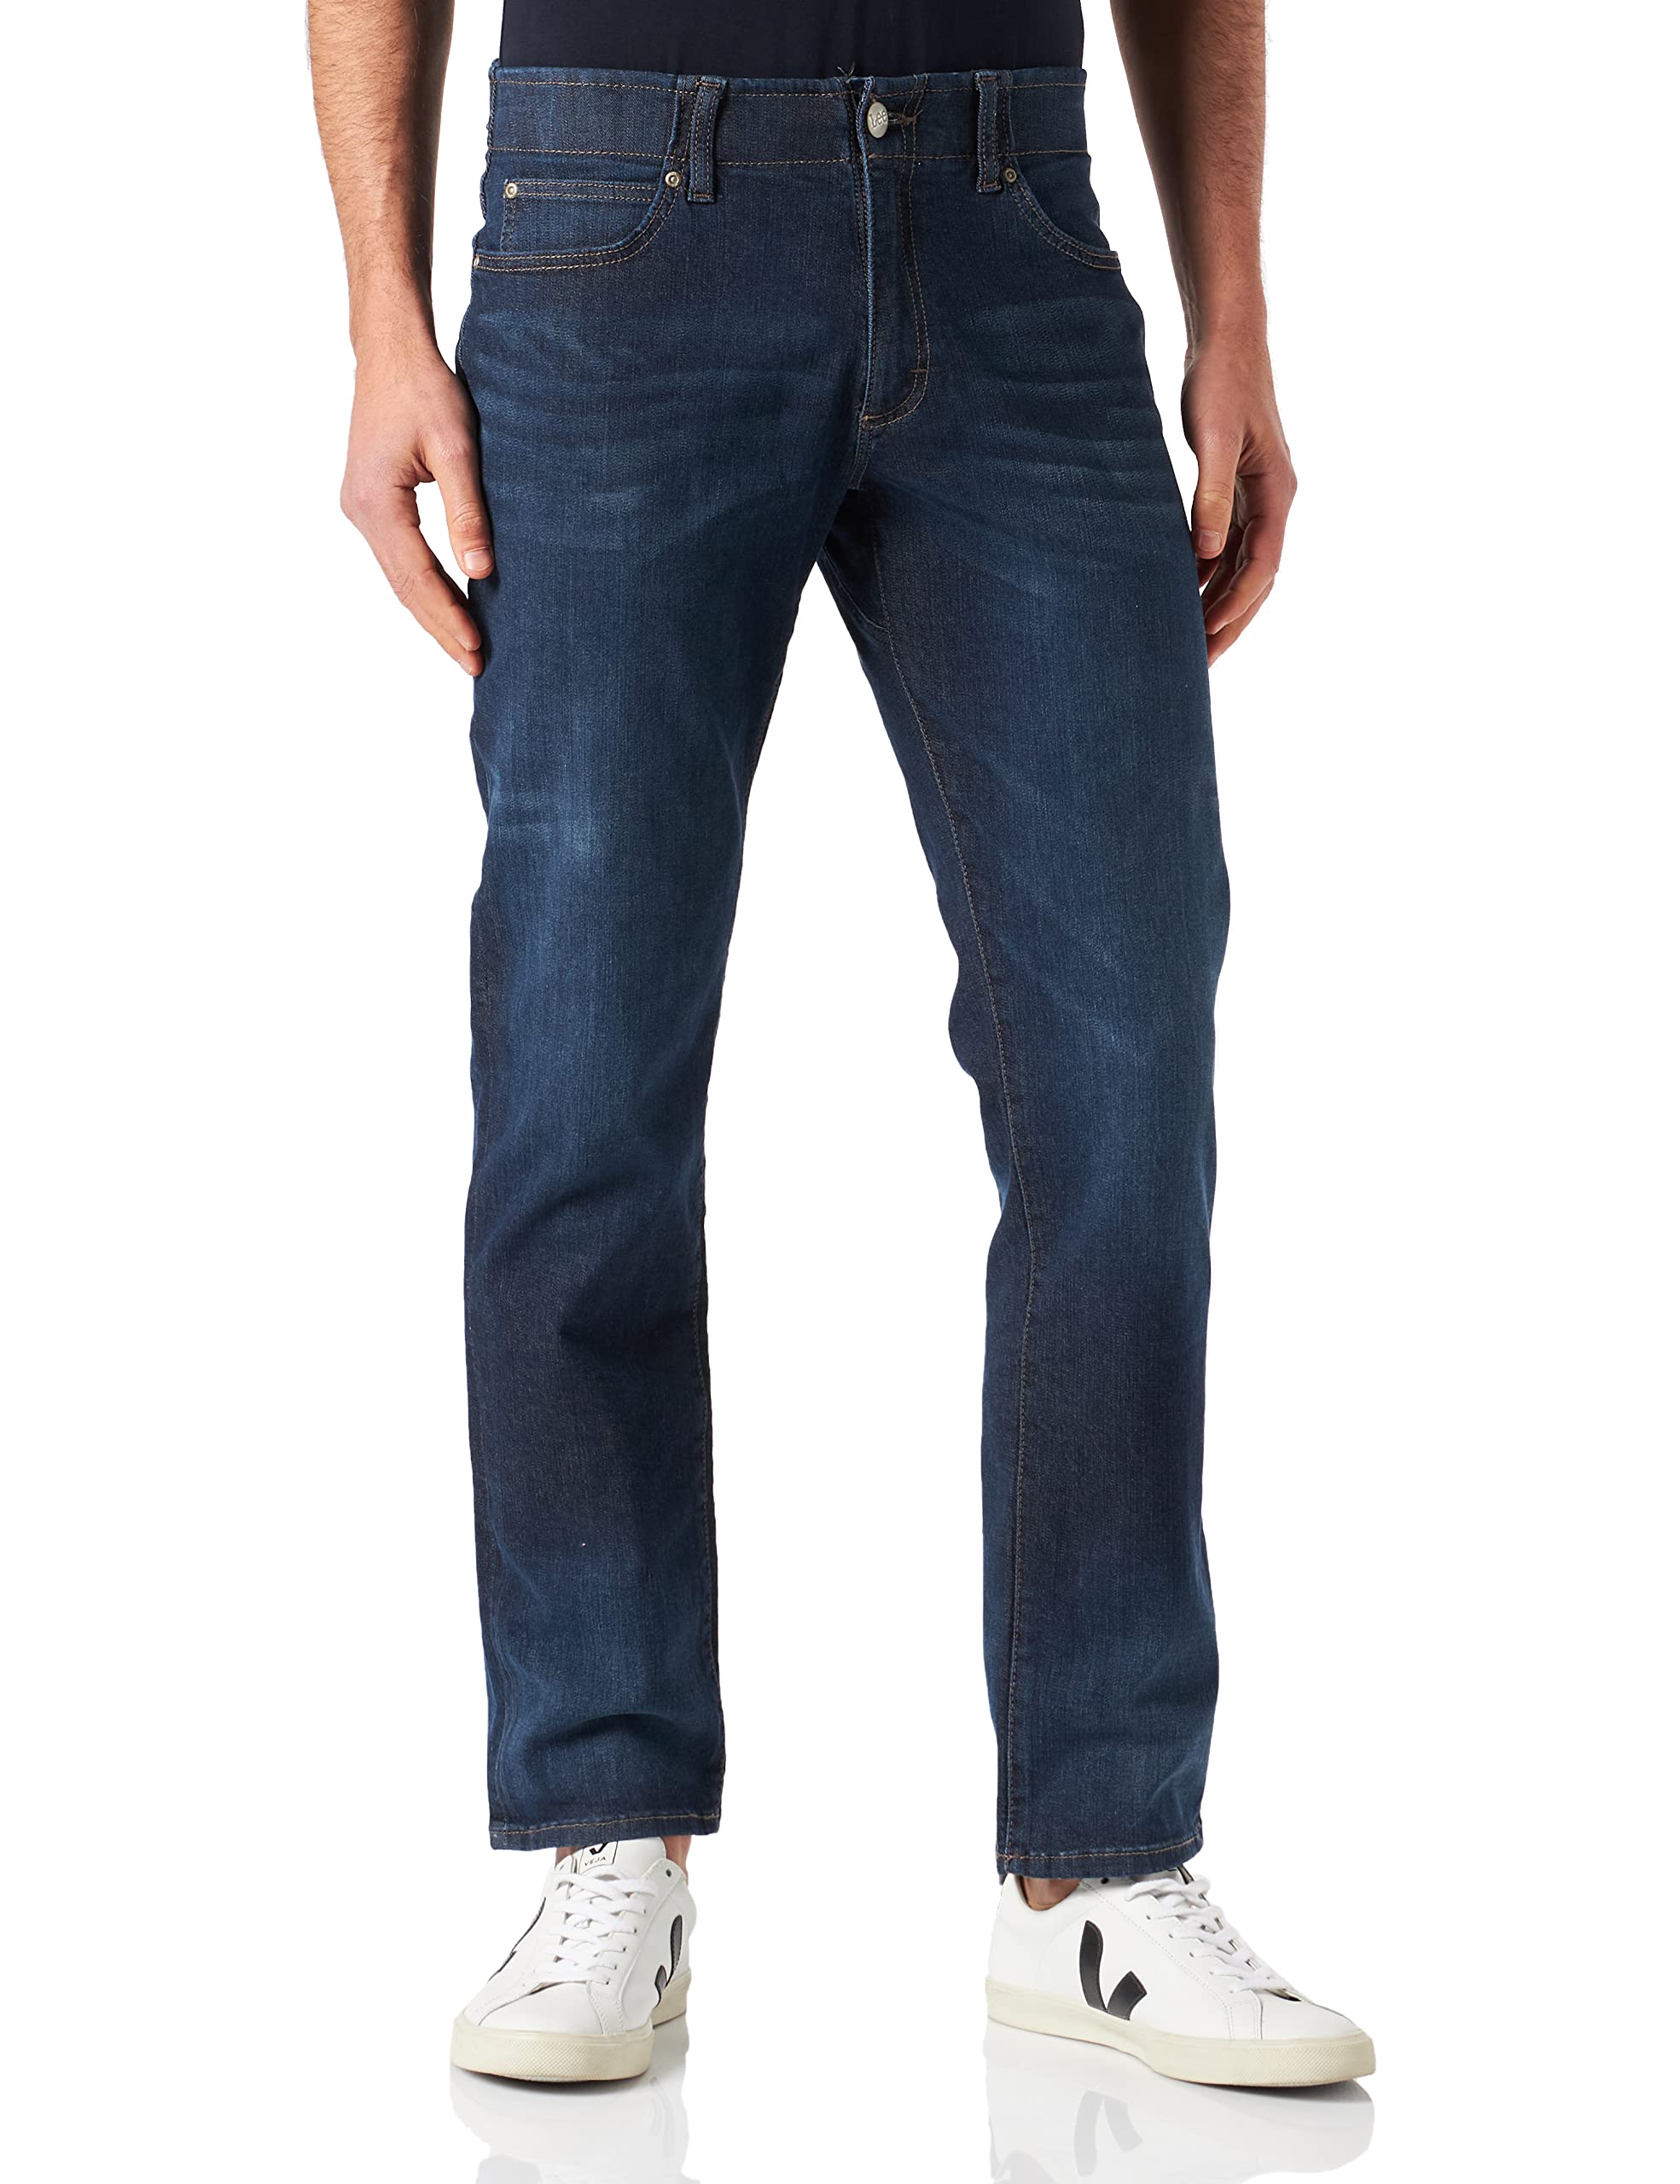 Lee Herren Straight Fit Xm Extreme Motion Jeans, Trip, 38W / 34L